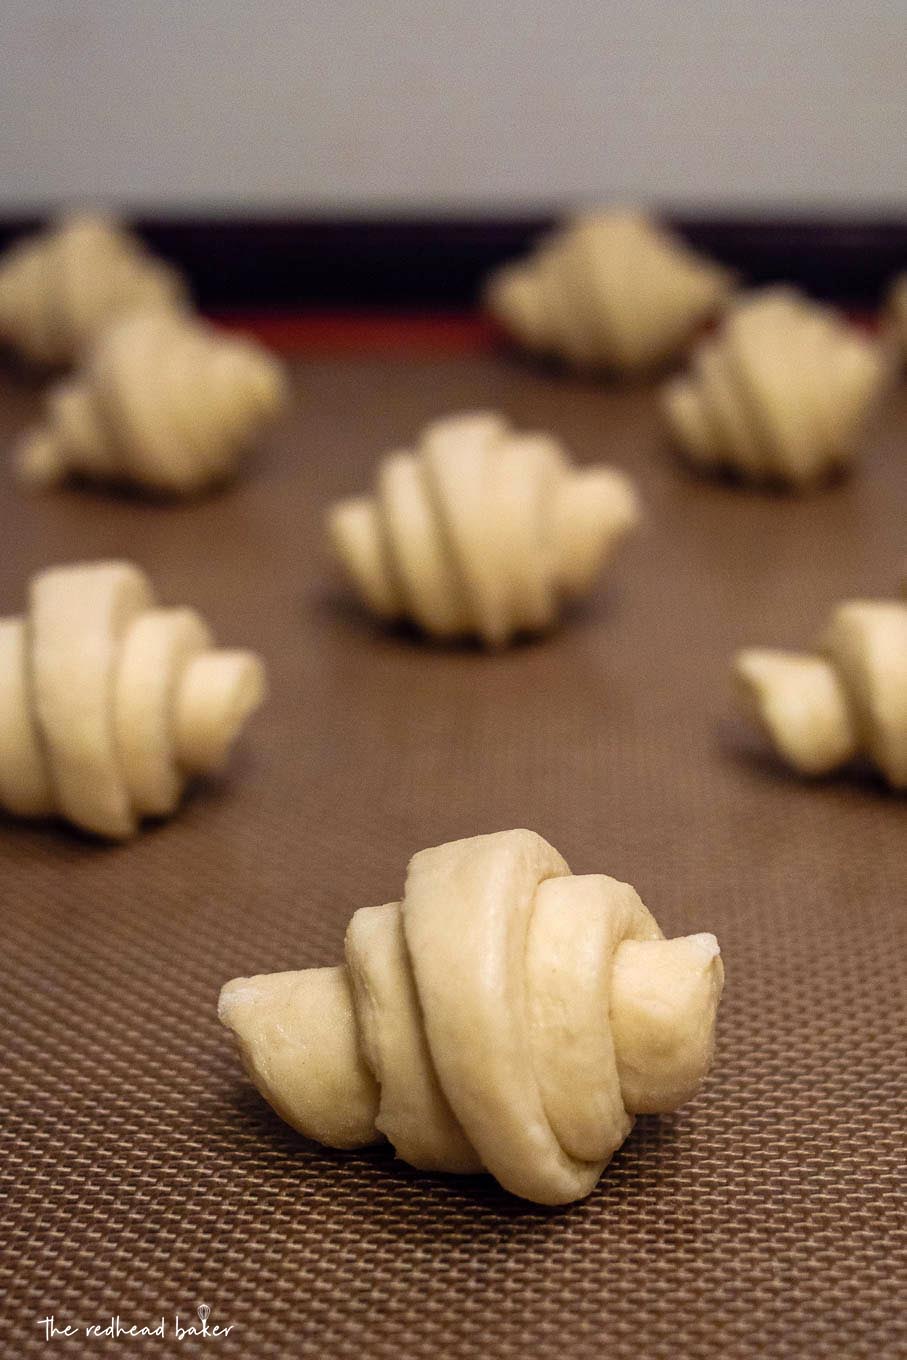 A baking sheet with 7 formed croissants ready to bake.